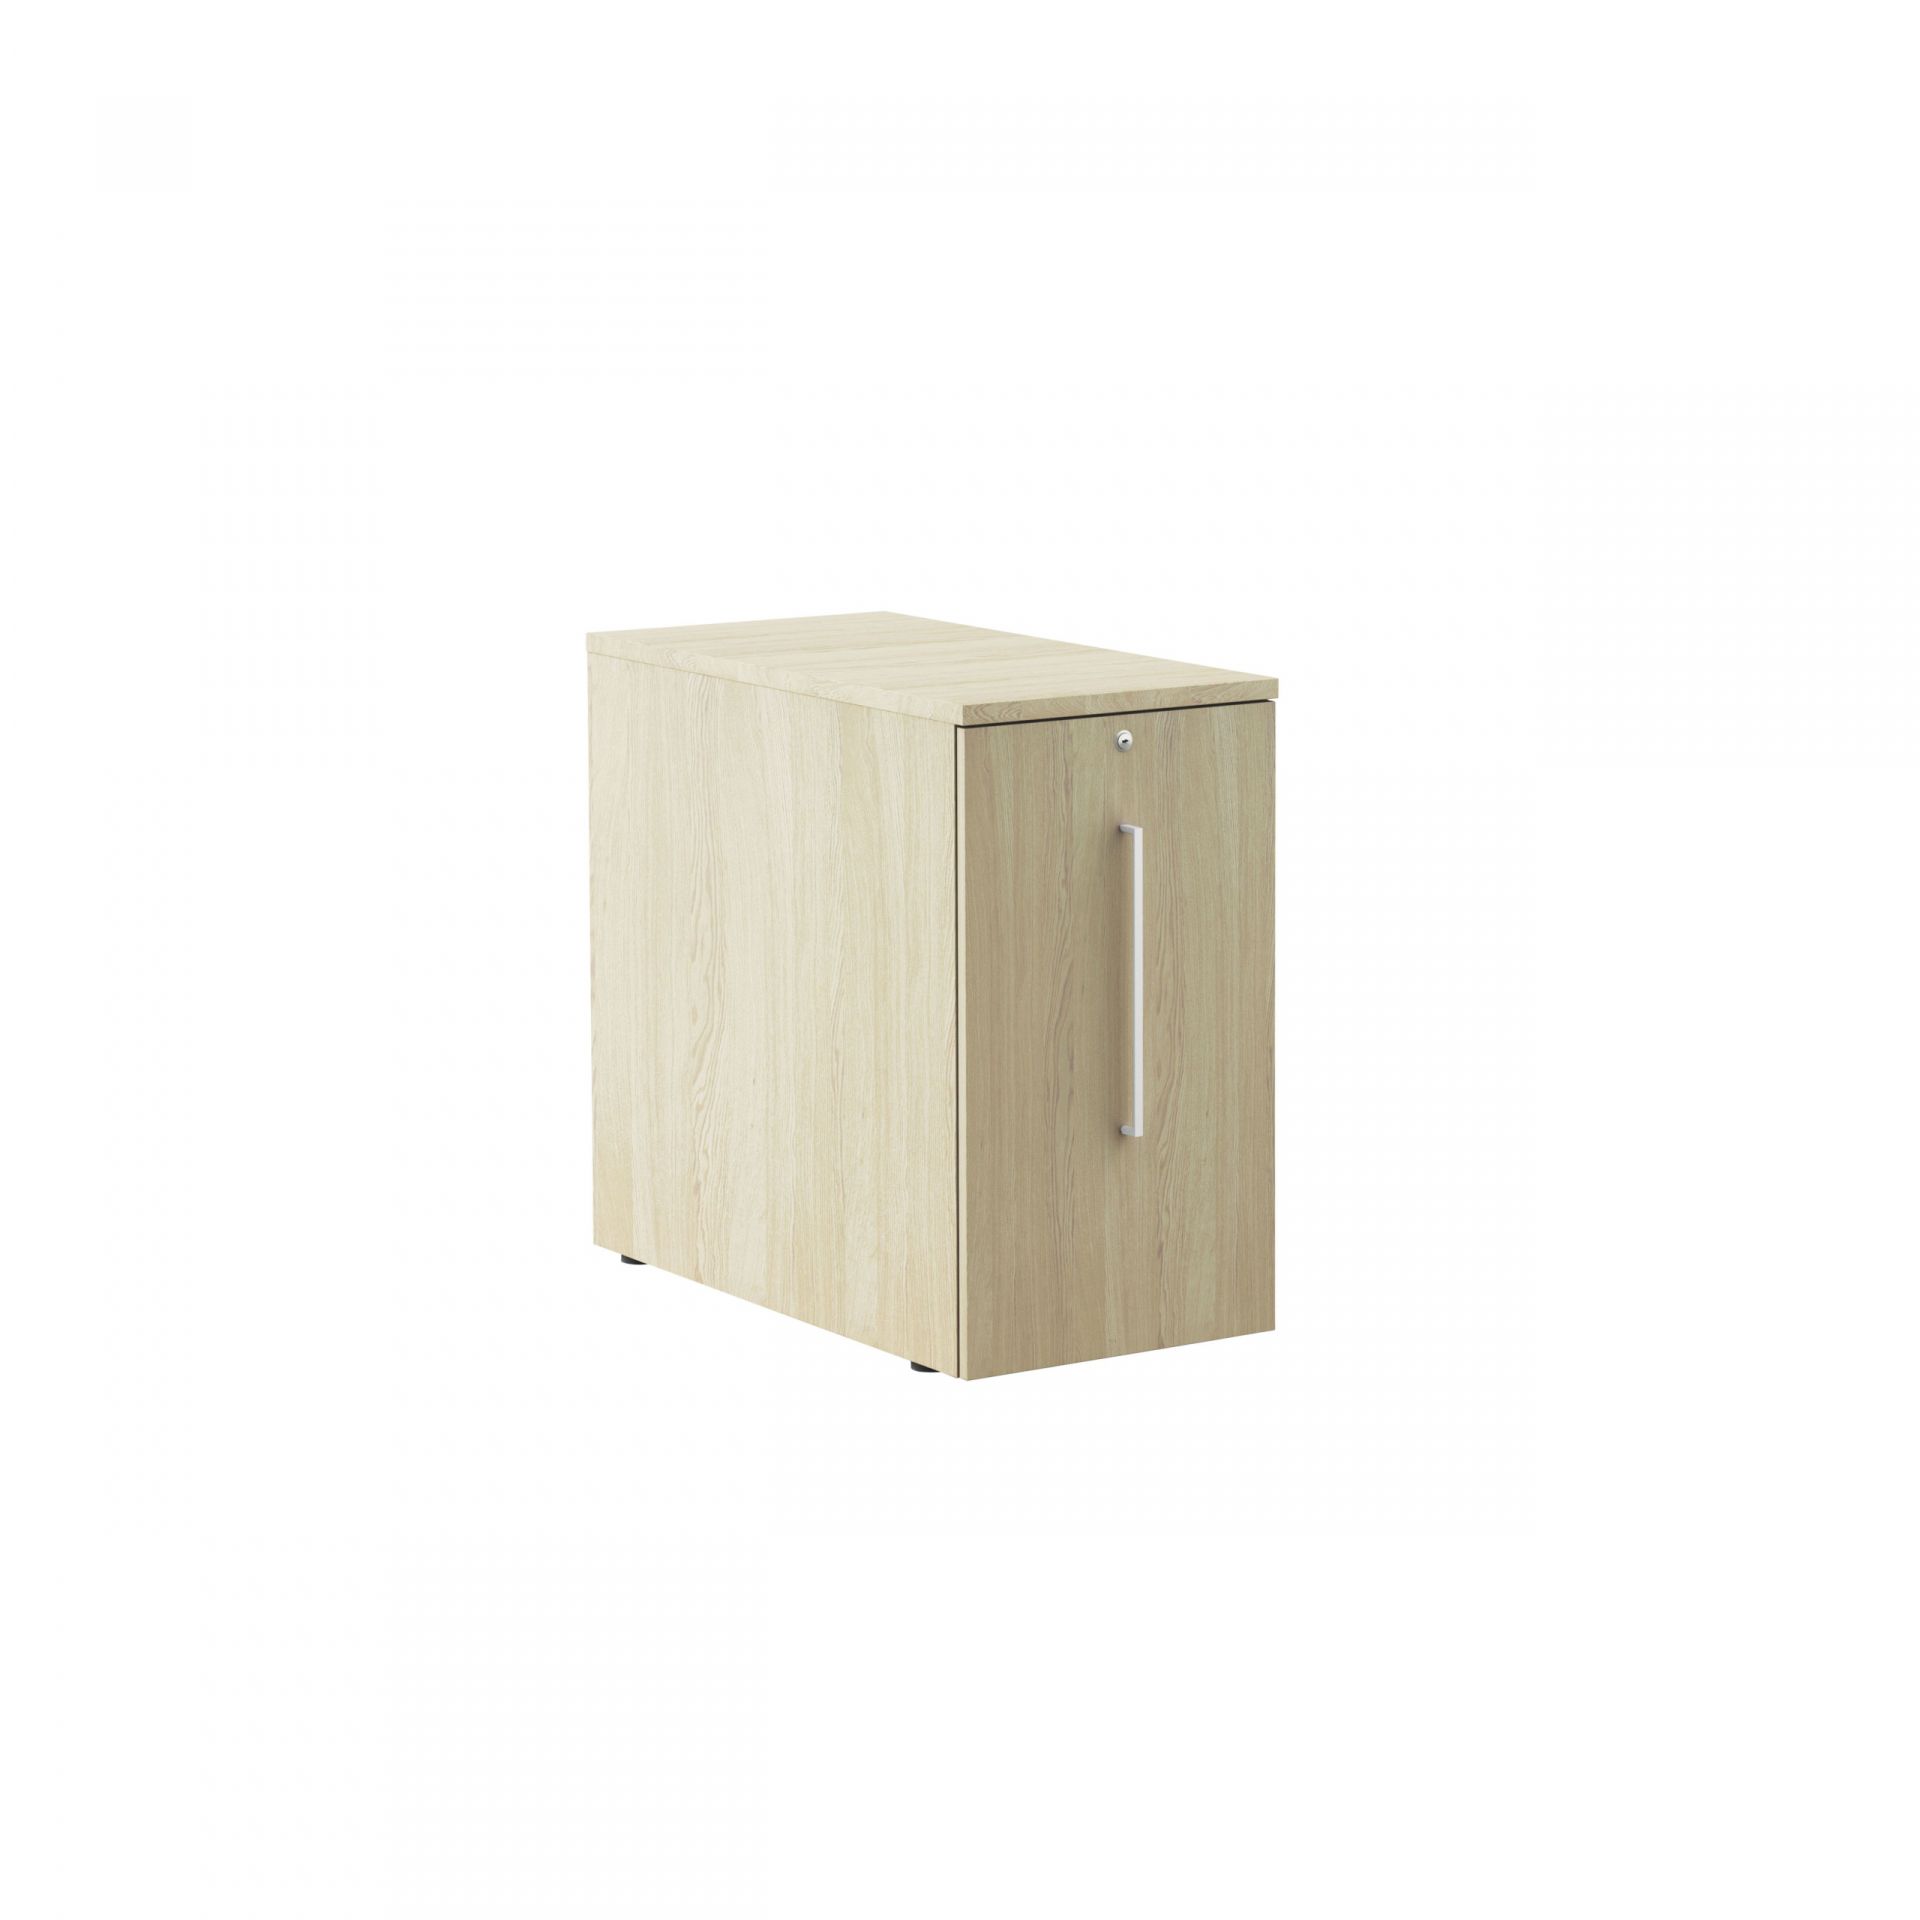 Hold Tower cabinet product image 4